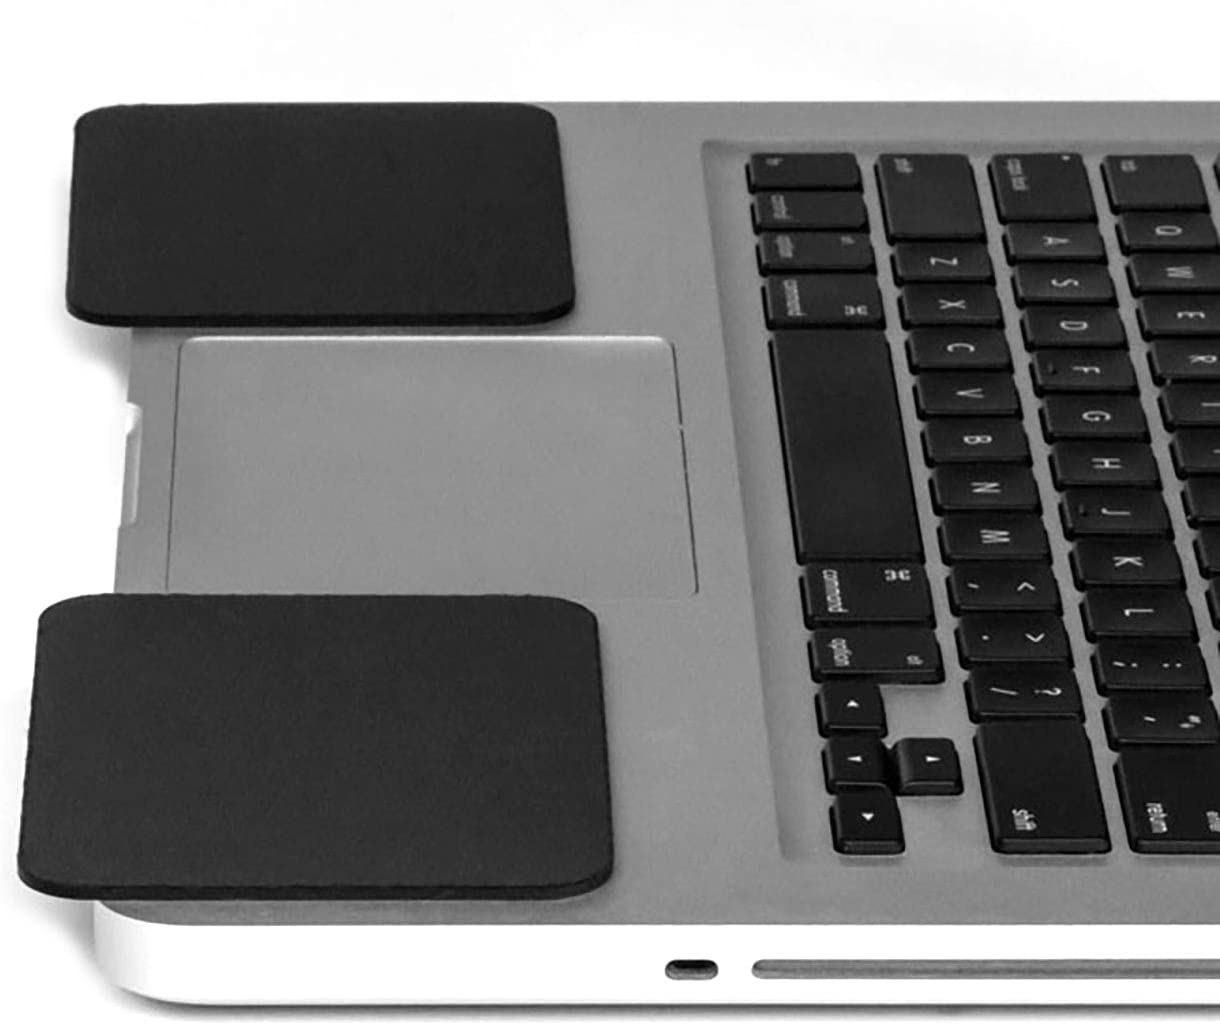 Wrist pads placed on both sides of Macbook touchpad